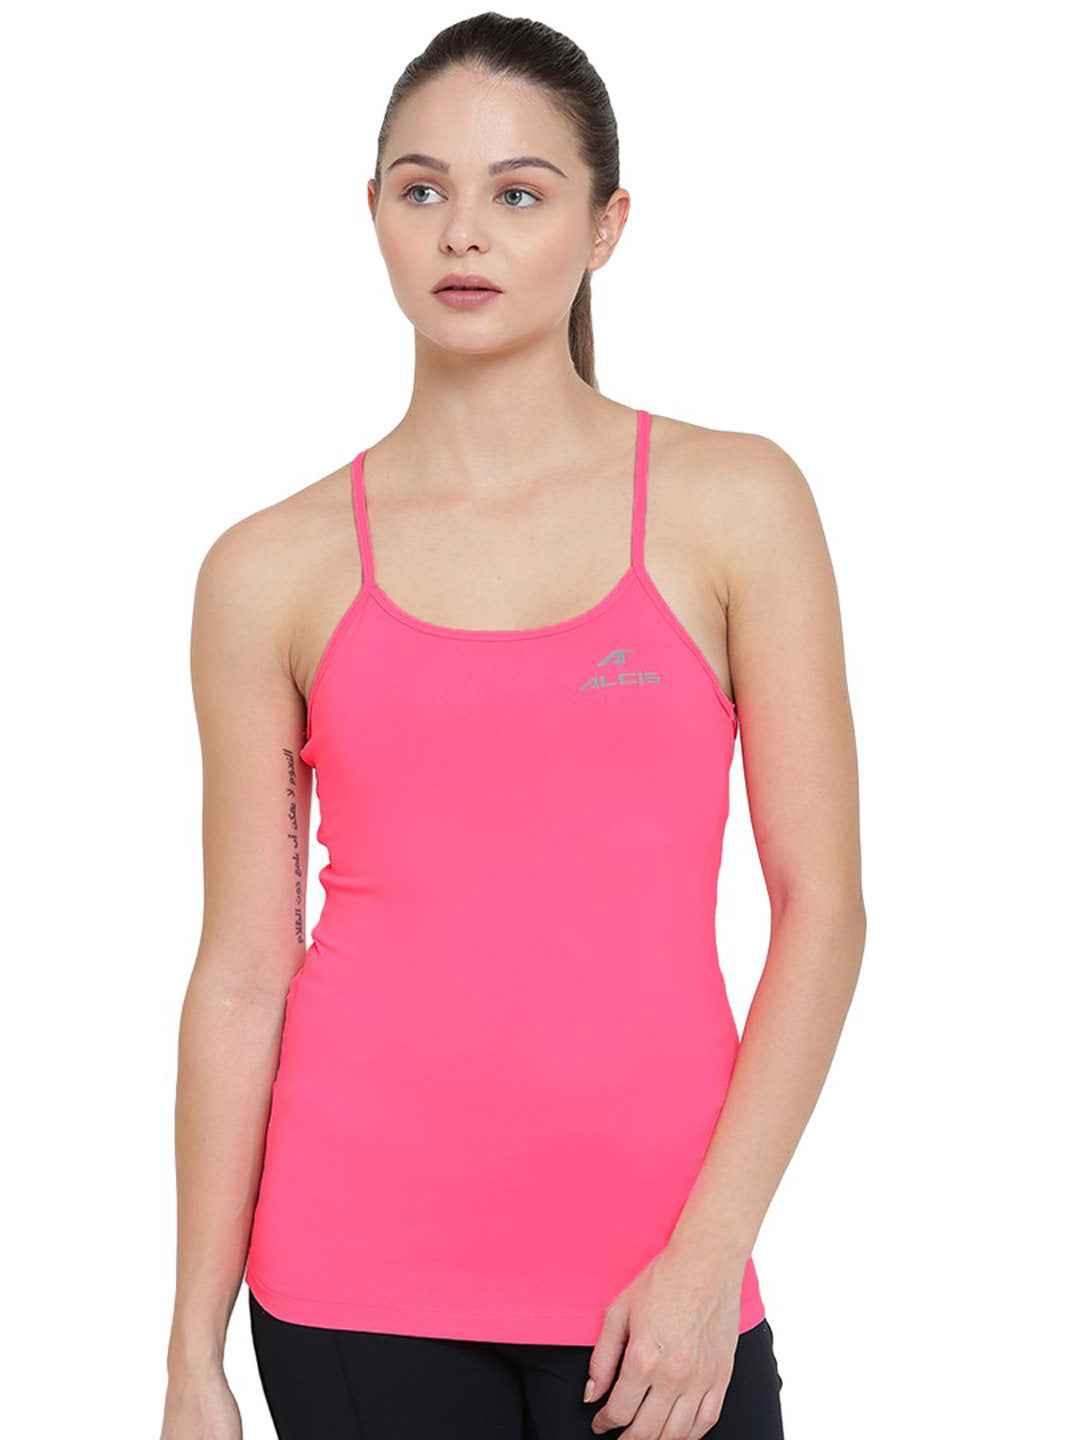 Alcis Lean Strap Back Pink Tank Top ALWTP138408-S